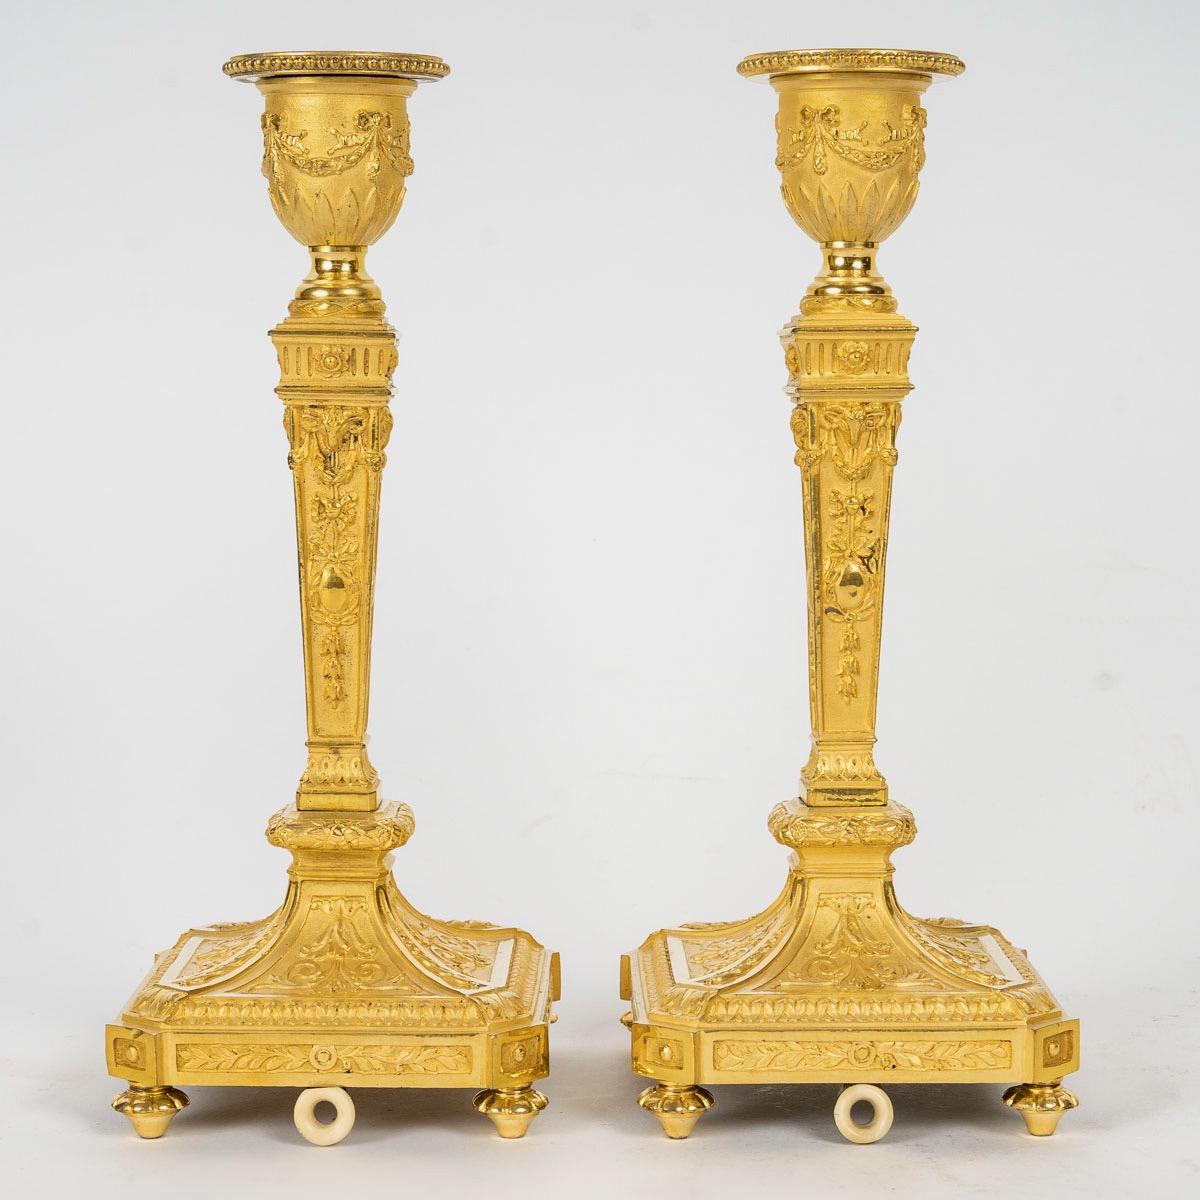 Louis XVI A Very Fine Quality 19th Century French Pair of Candlesticks For Sale